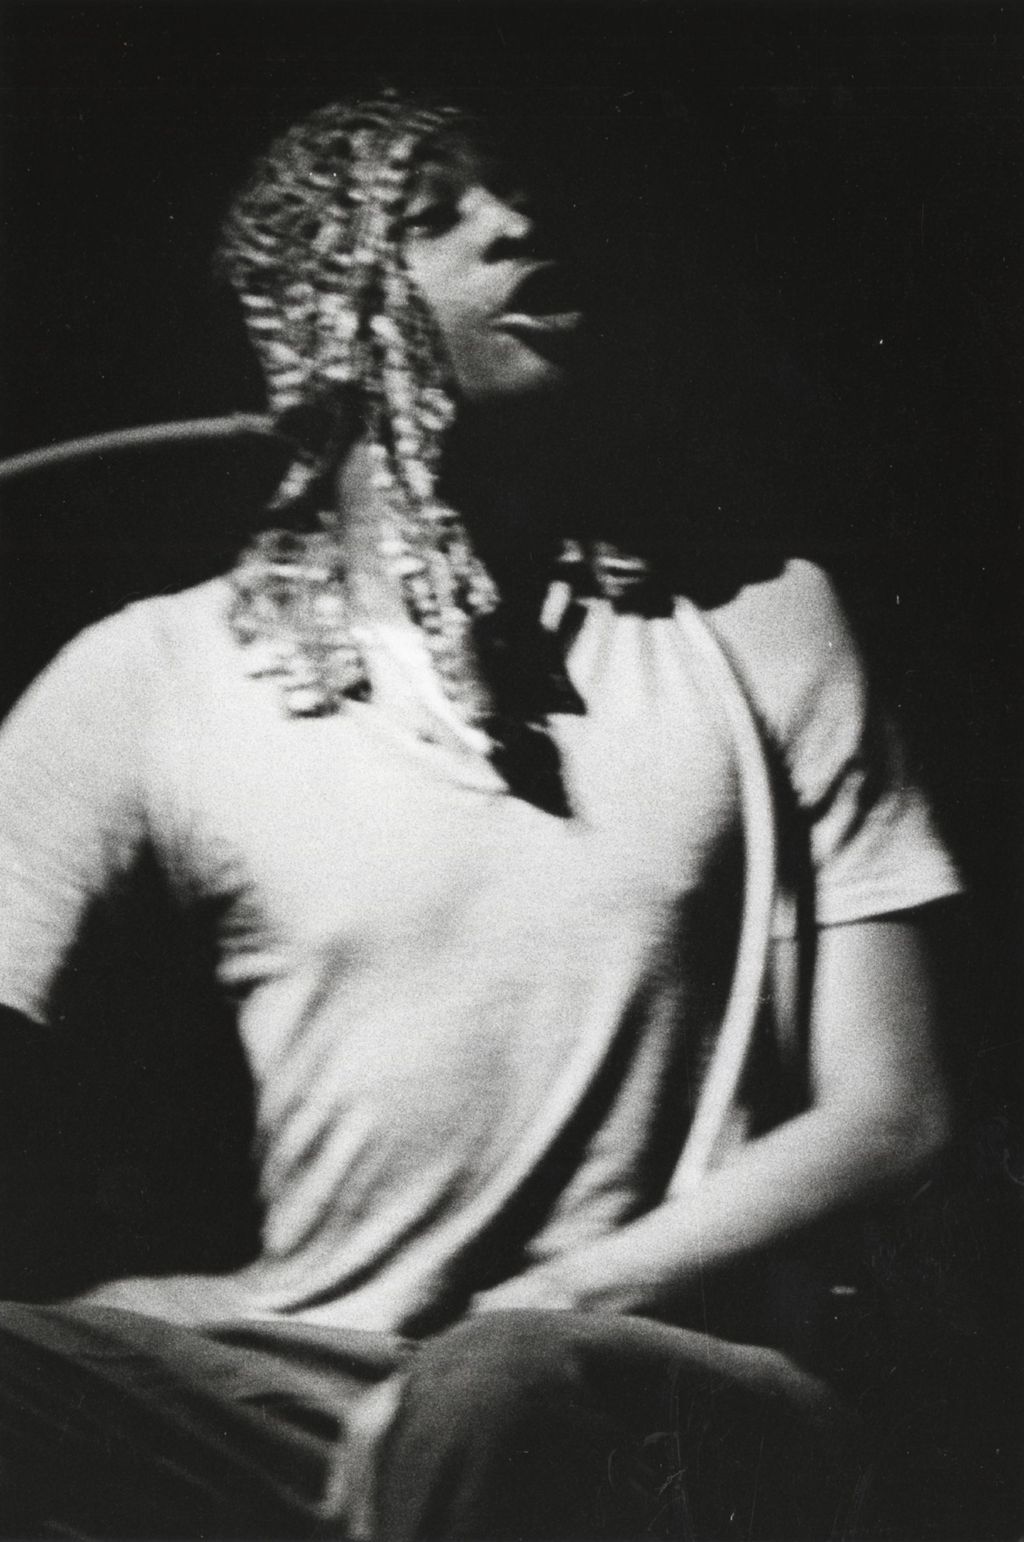 Bill Terry on stage in a production of "The Connection" at Hull-House Sheridan playhouse